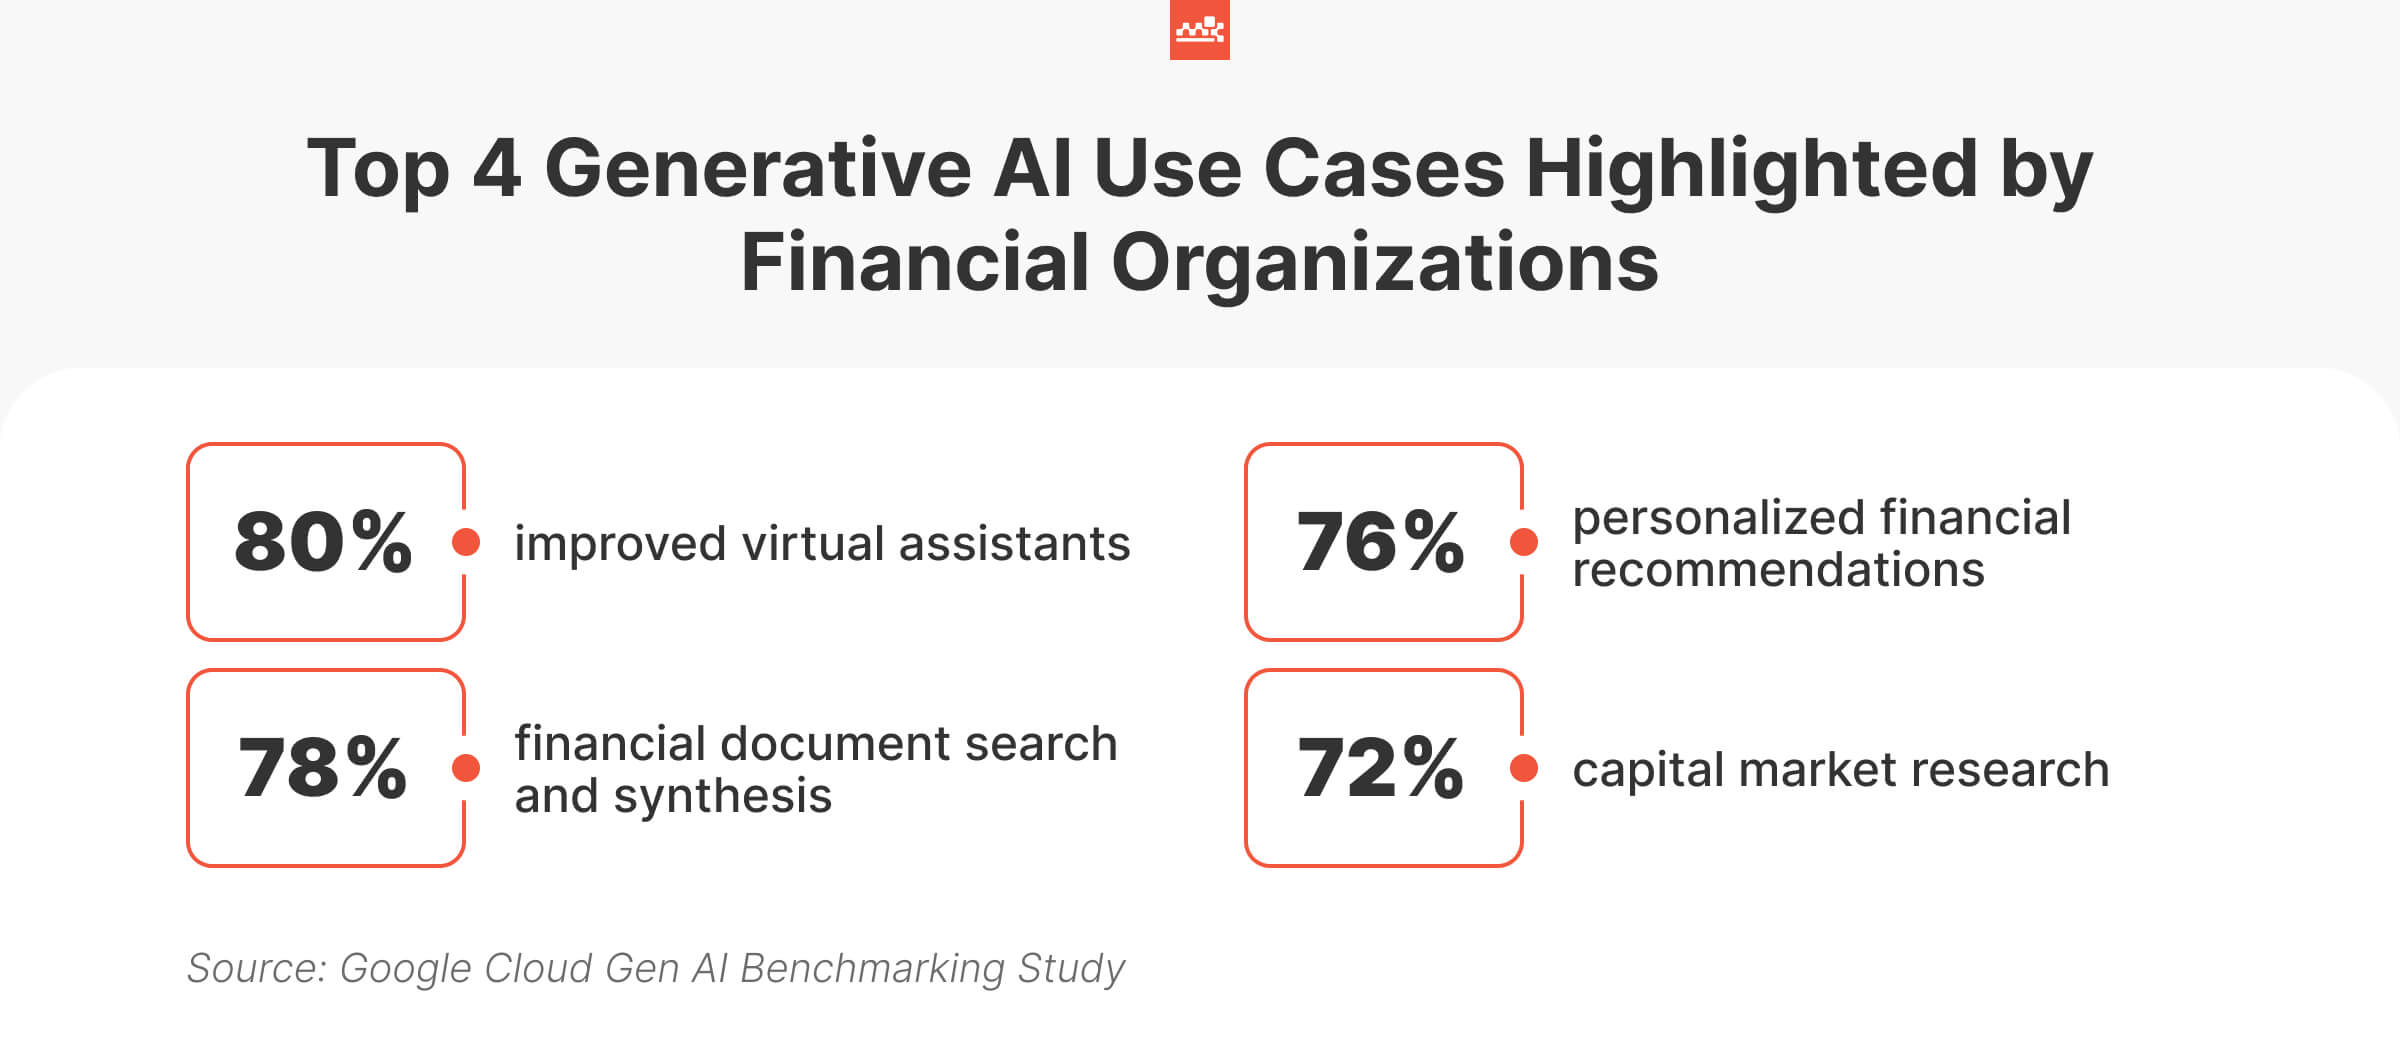 Top 4 Generative AI Use Cases Highlighted by Financial Organizations